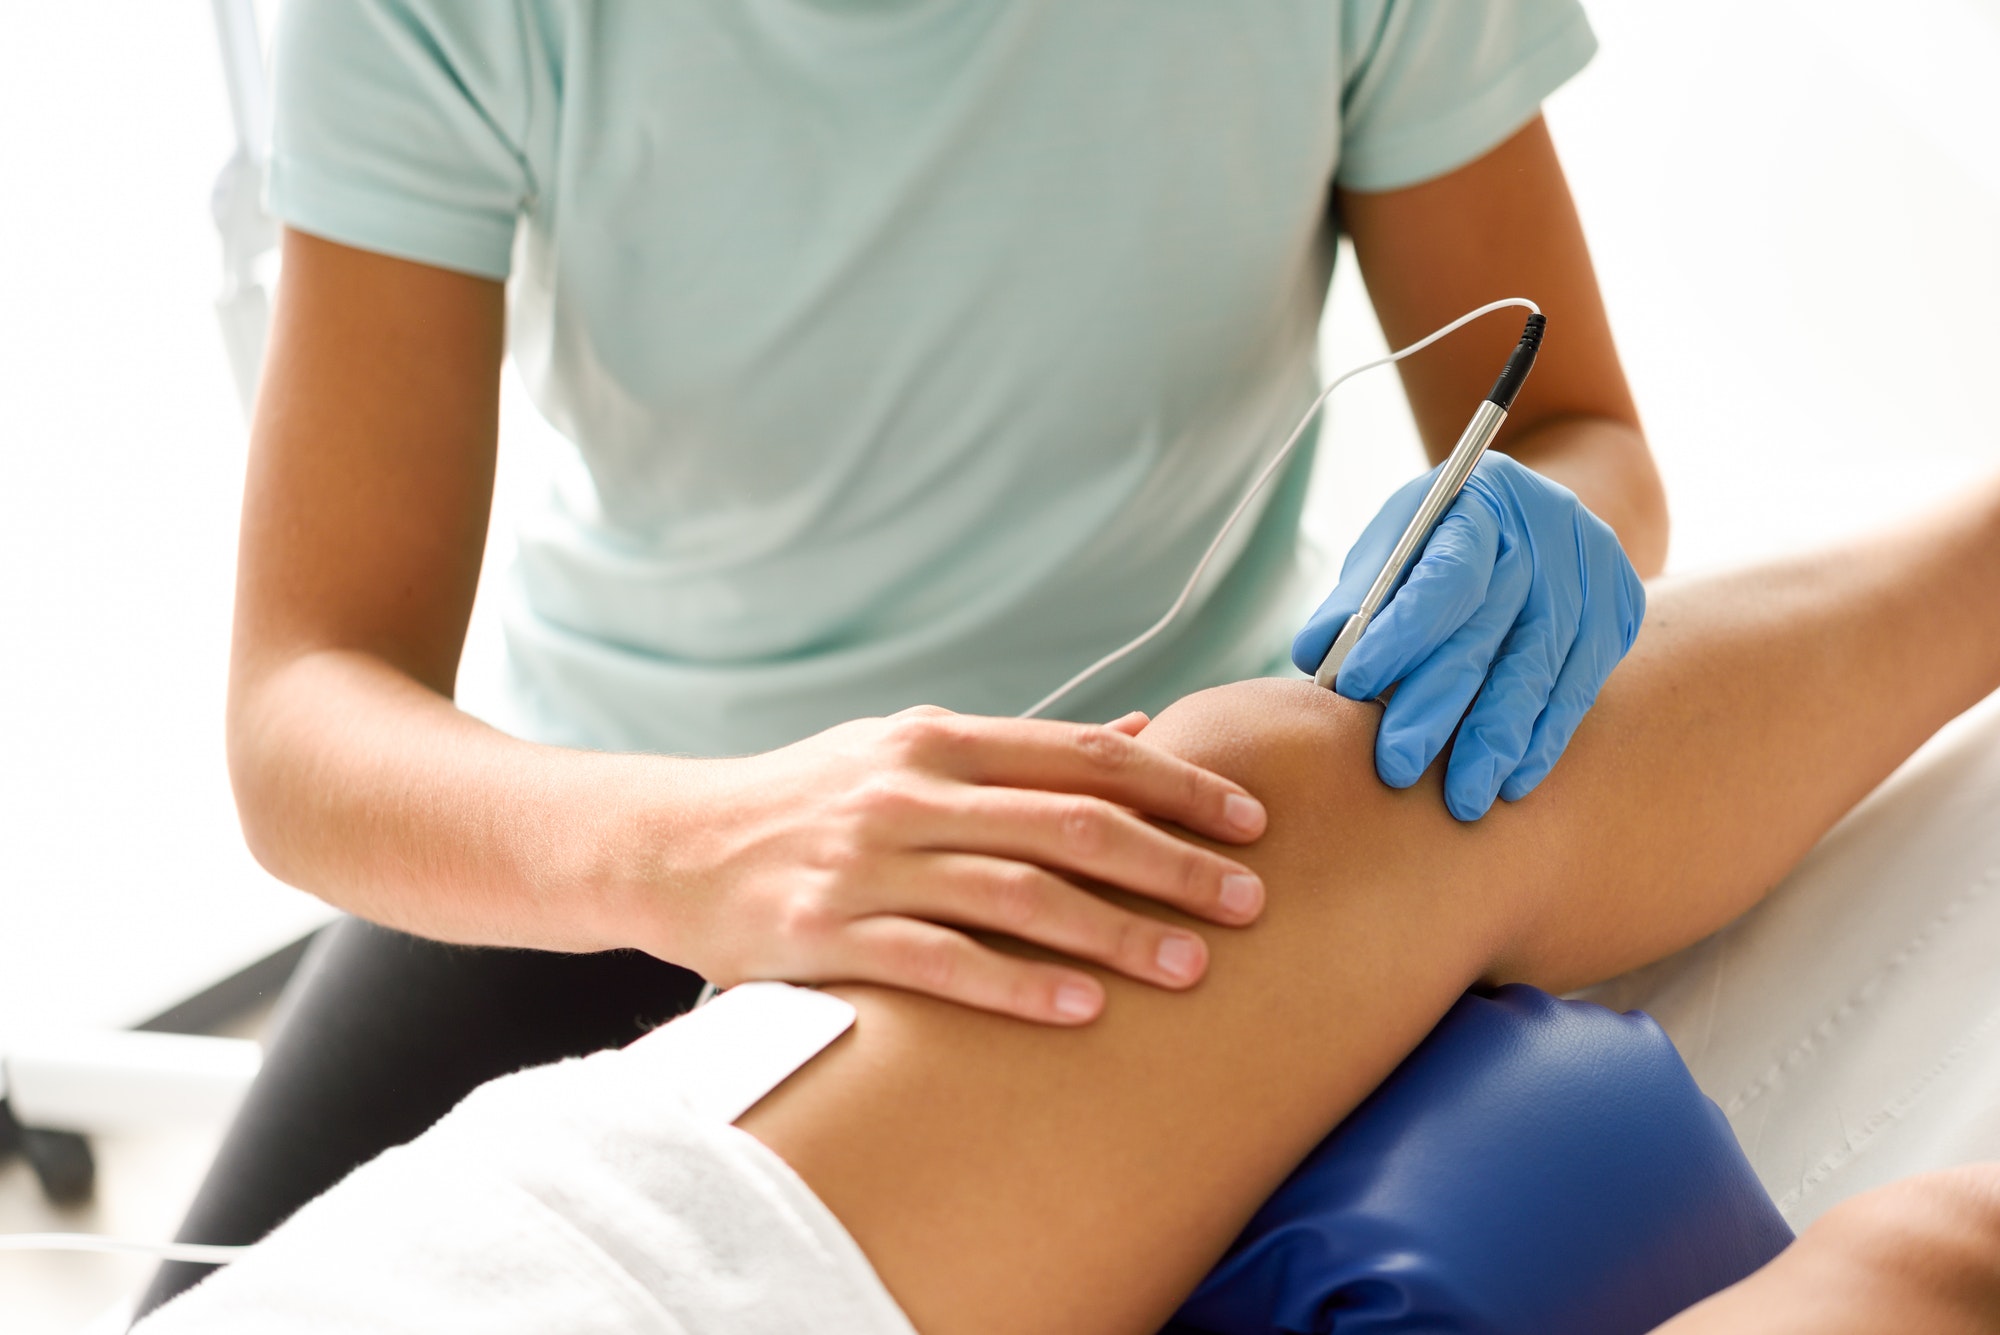 Electroacupuncture dry with needle on female knee